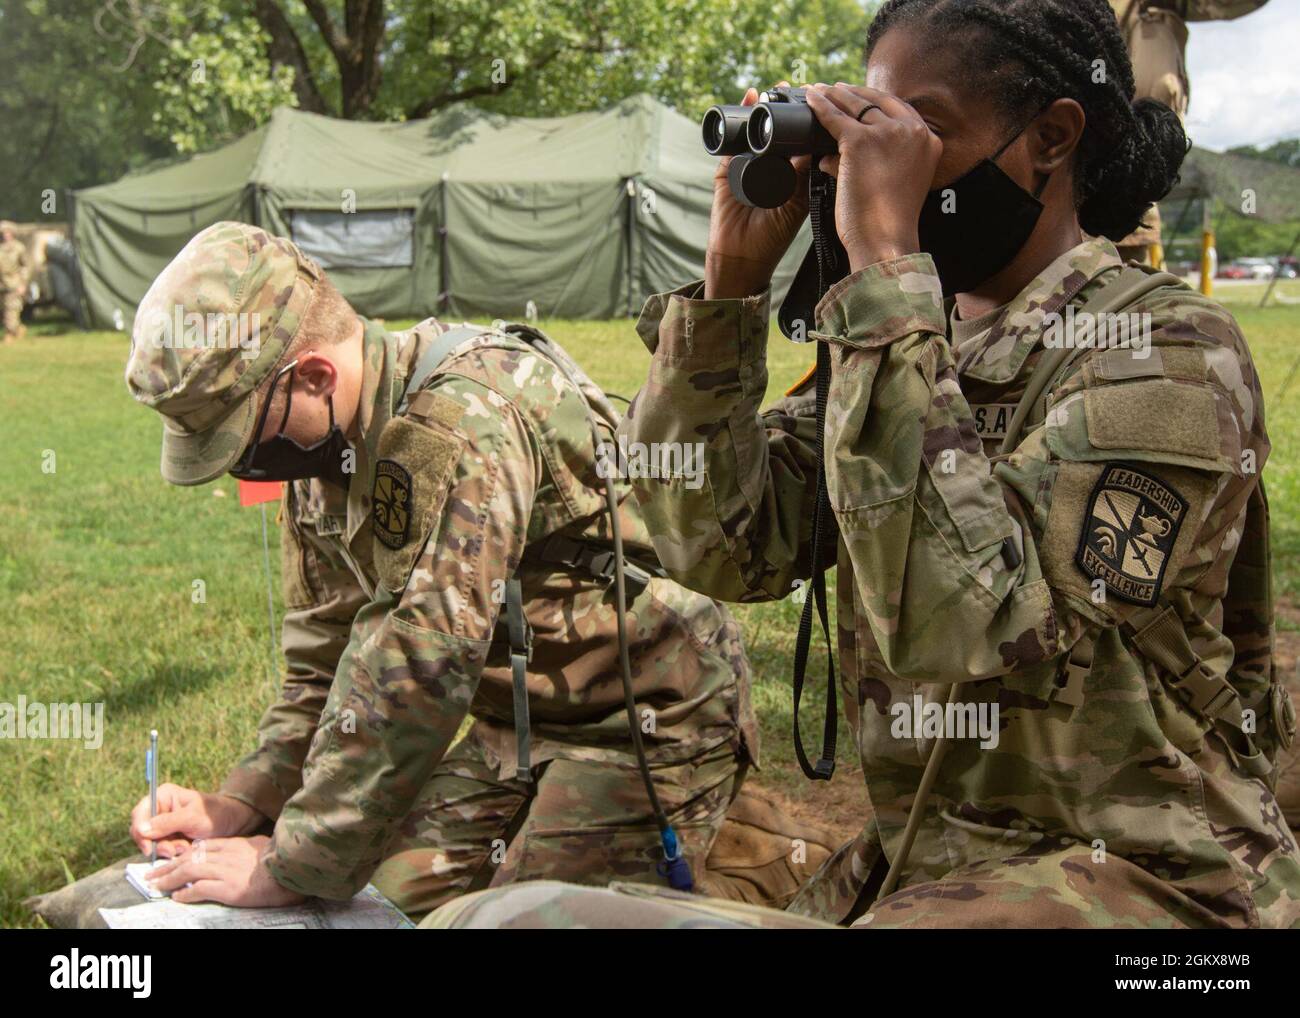 Cadets Raquel Piercey, University of Texas at El Paso, and Tyler Stewart, Colorado School of Mines, plan adjustments on a map as they call for simulated artillery to strike as part of Call for Fire during the Warrior Skills portion of Cadet Summer Training at Fort Knox, Ky., on July 16, 2021. Stock Photo